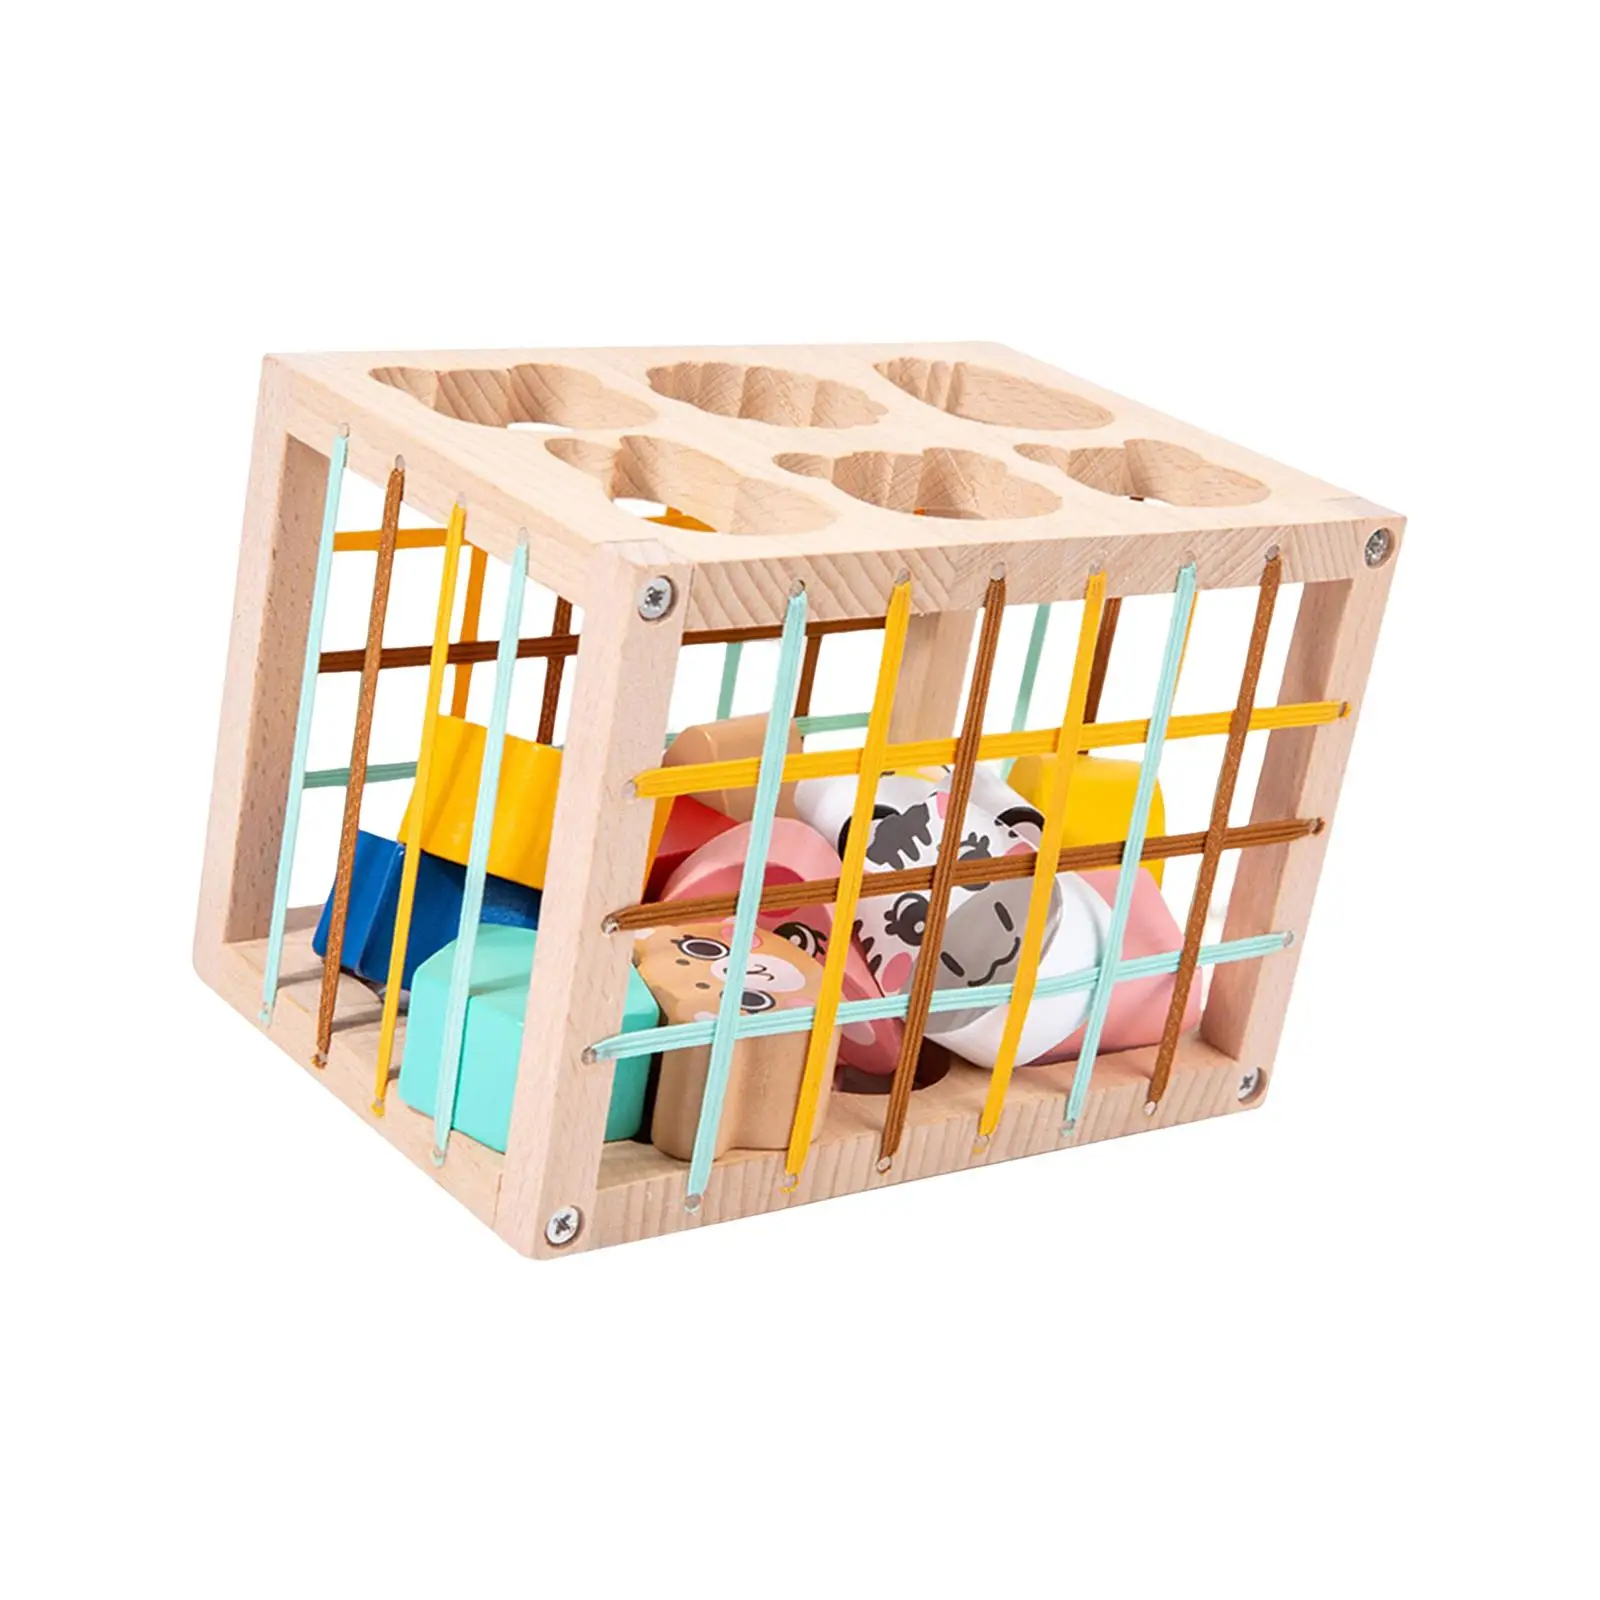 Wooden Shape Sorter Recognition Fine Motor Skills Educational Toy Sensory Matching Puzzle Toy for Baby Preschool Children Kids